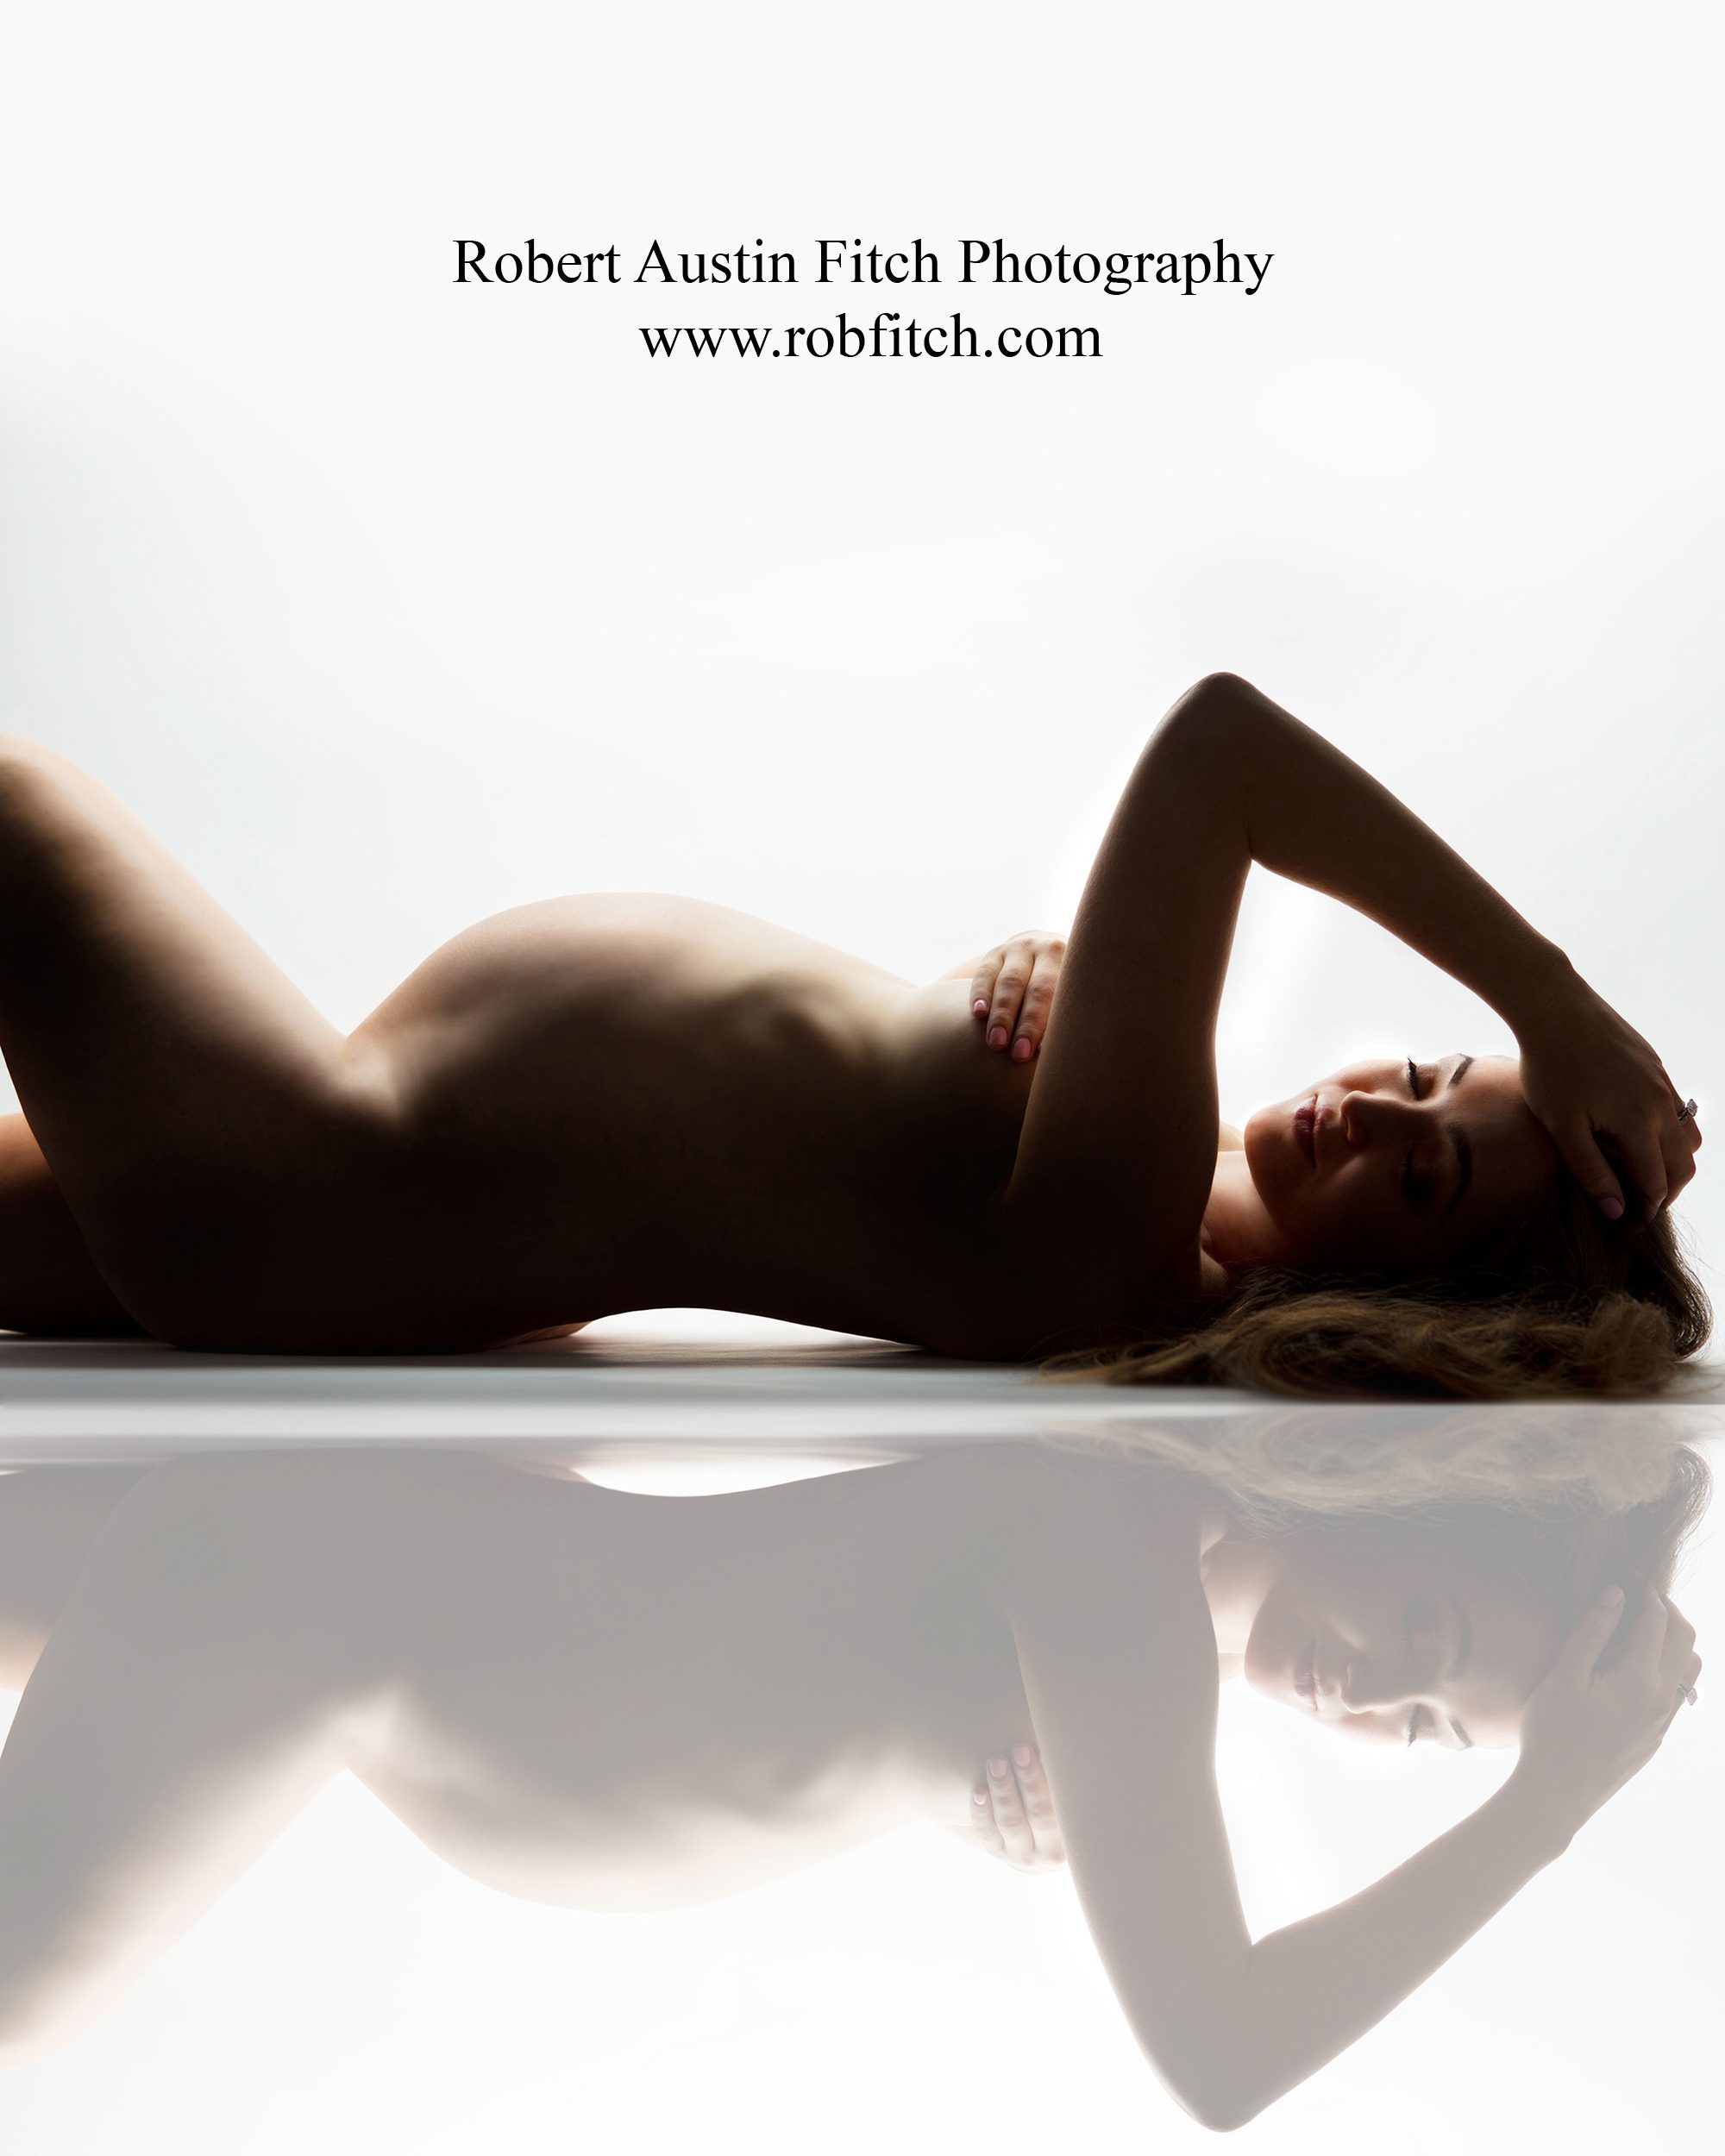 Artistic nude maternity photo with reflection